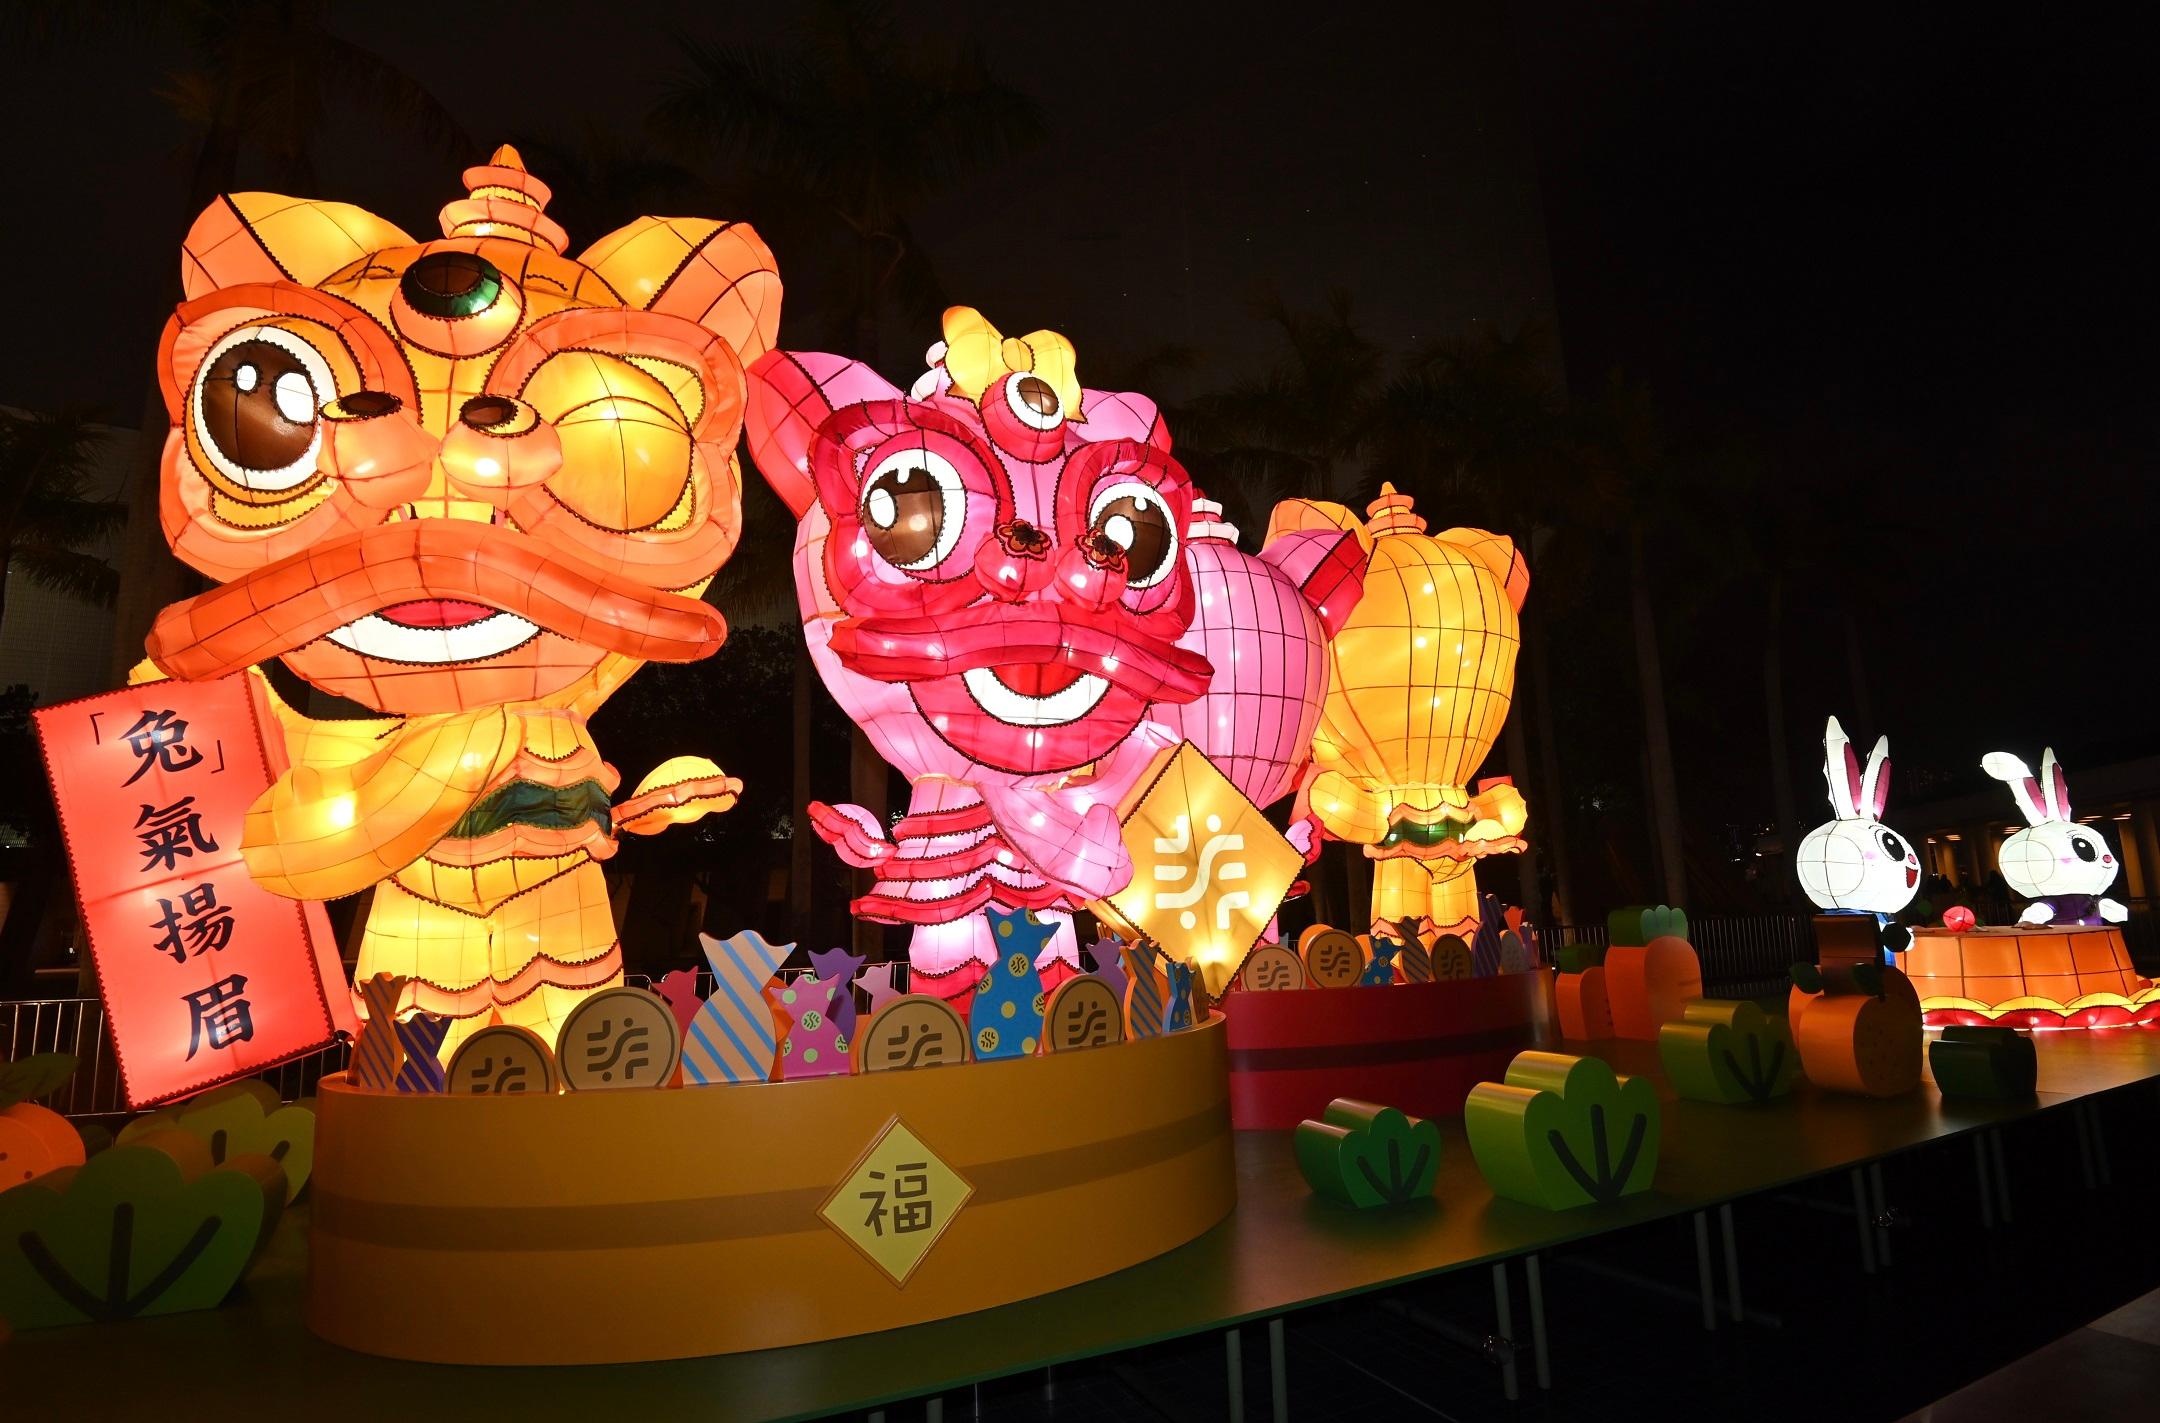 The Leisure and Cultural Services Department (LCSD) will present the Urban Lunar New Year Lantern Displays "The Luck-Bringing Rabbit - Lanterns to Celebrate the New Year" at the Hong Kong Cultural Centre (HKCC) Piazza from today (January 12) until February 7. Admission is free. The Intangible Cultural Heritage Office under the LCSD is collaborating with local master Hui Ka-hung to present lantern displays showcasing several sprightly rabbits, energetic lions, festive food and dim sum to add festive colour and a joyful atmosphere to the HKCC Piazza and to promote the art of traditional paper crafting. 